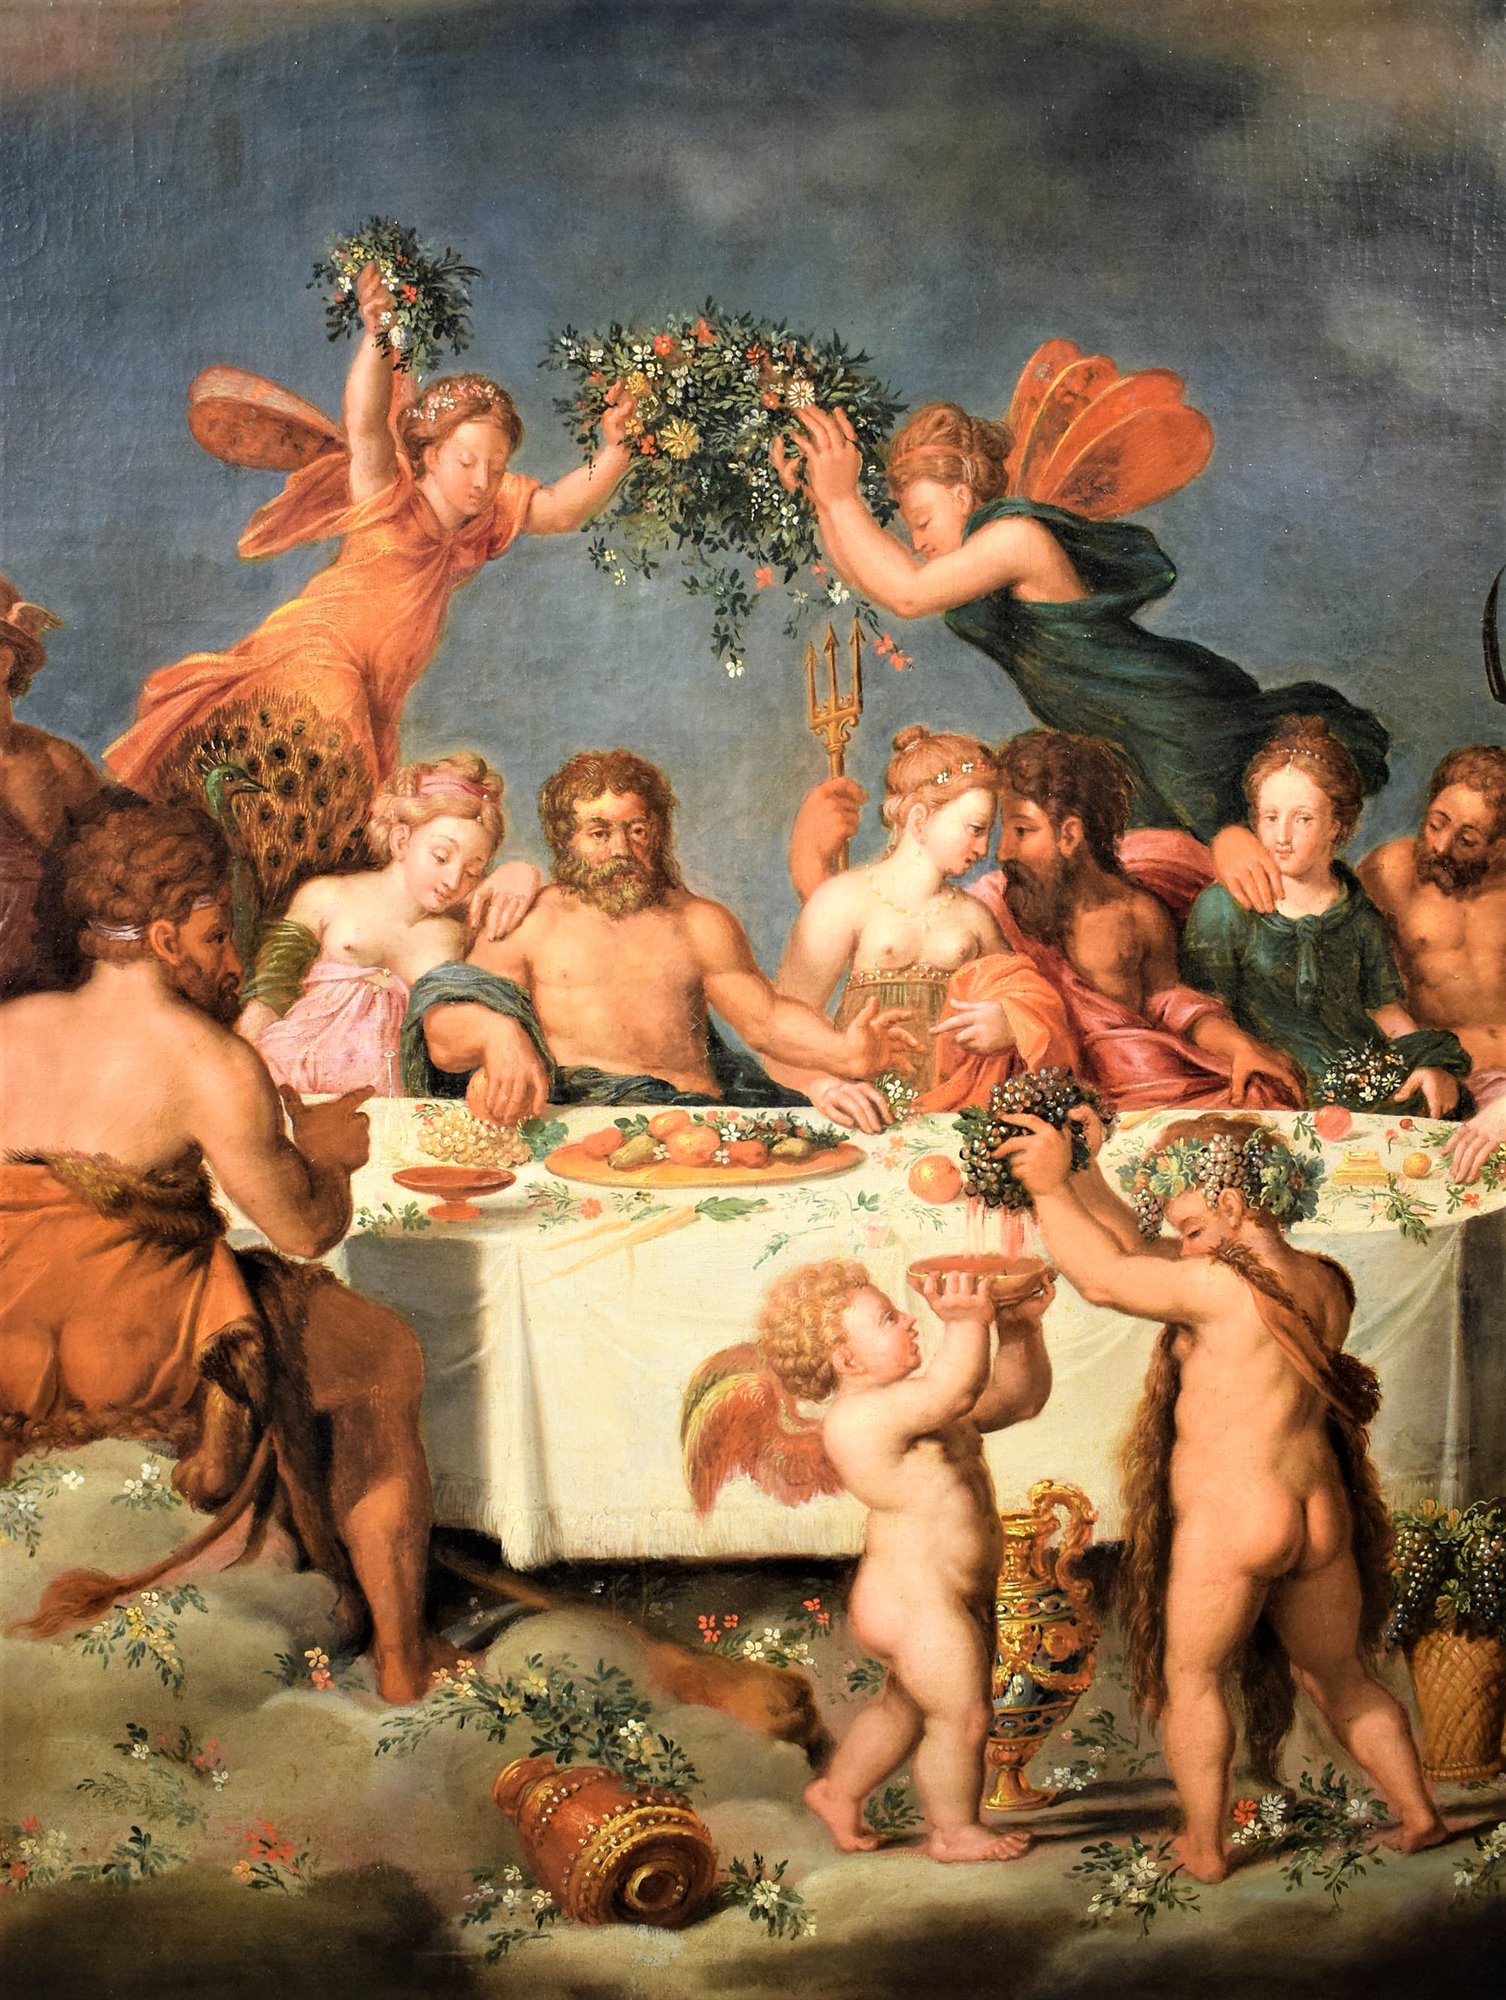 The feast of the Gods